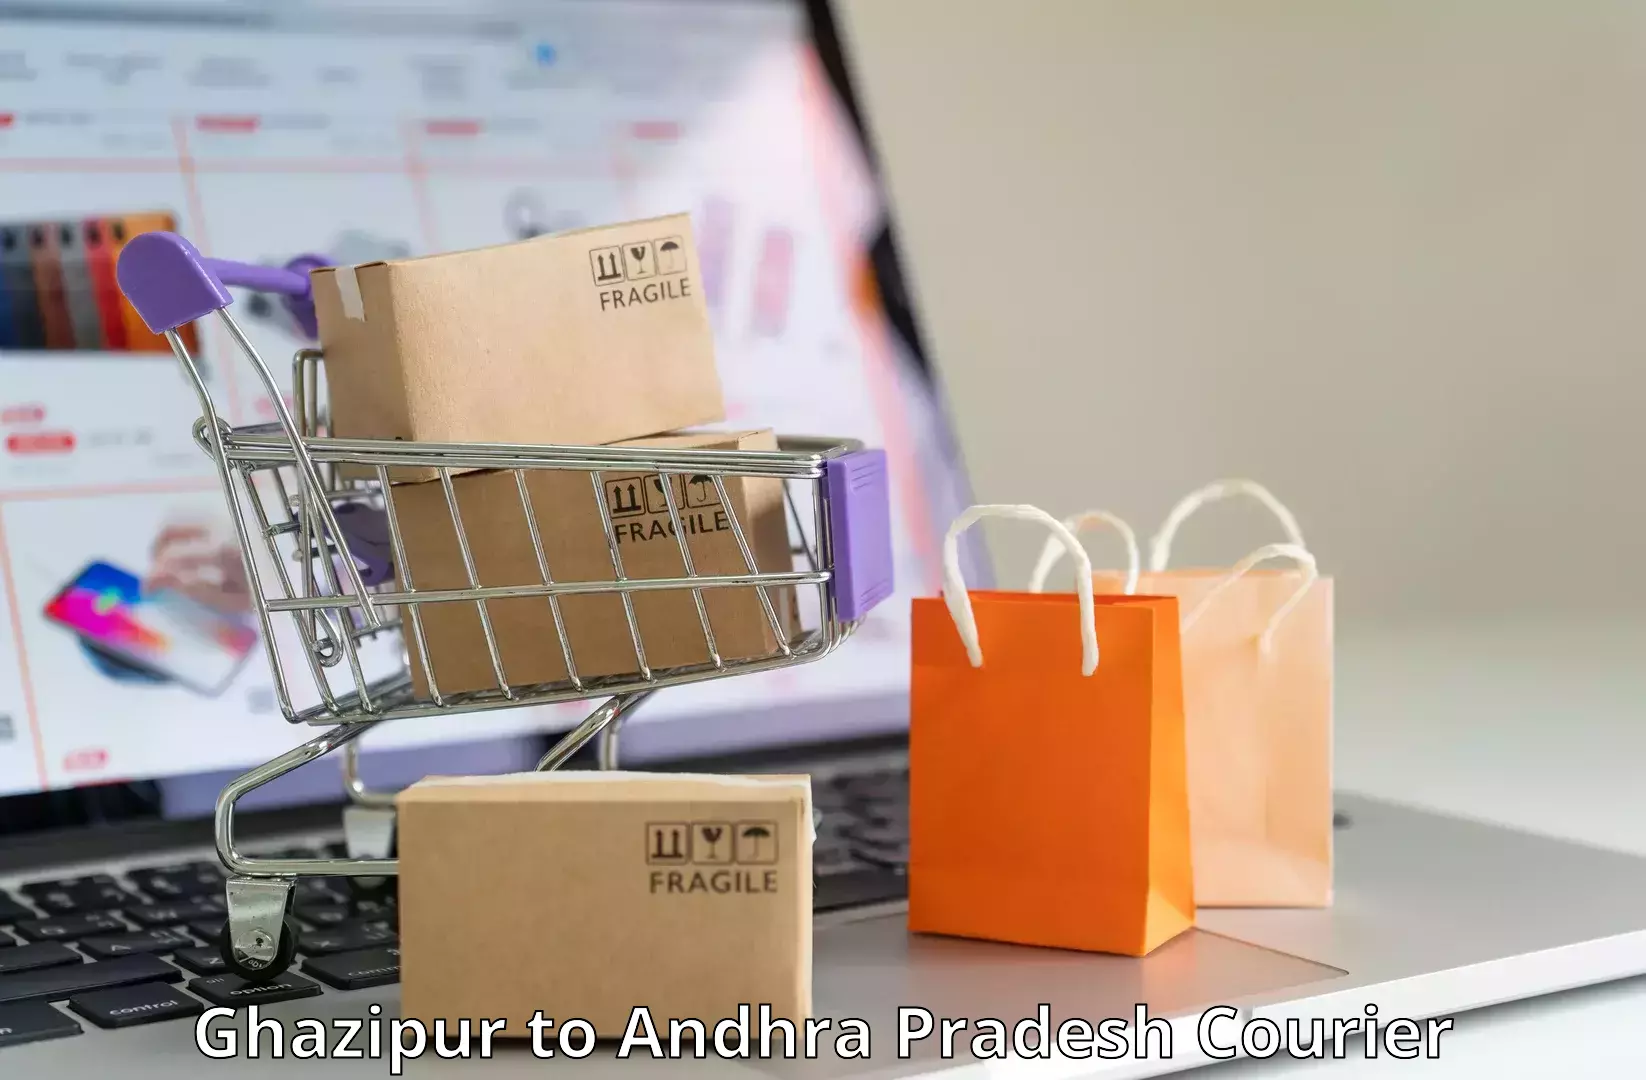 Quality courier partnerships Ghazipur to Tadikonda